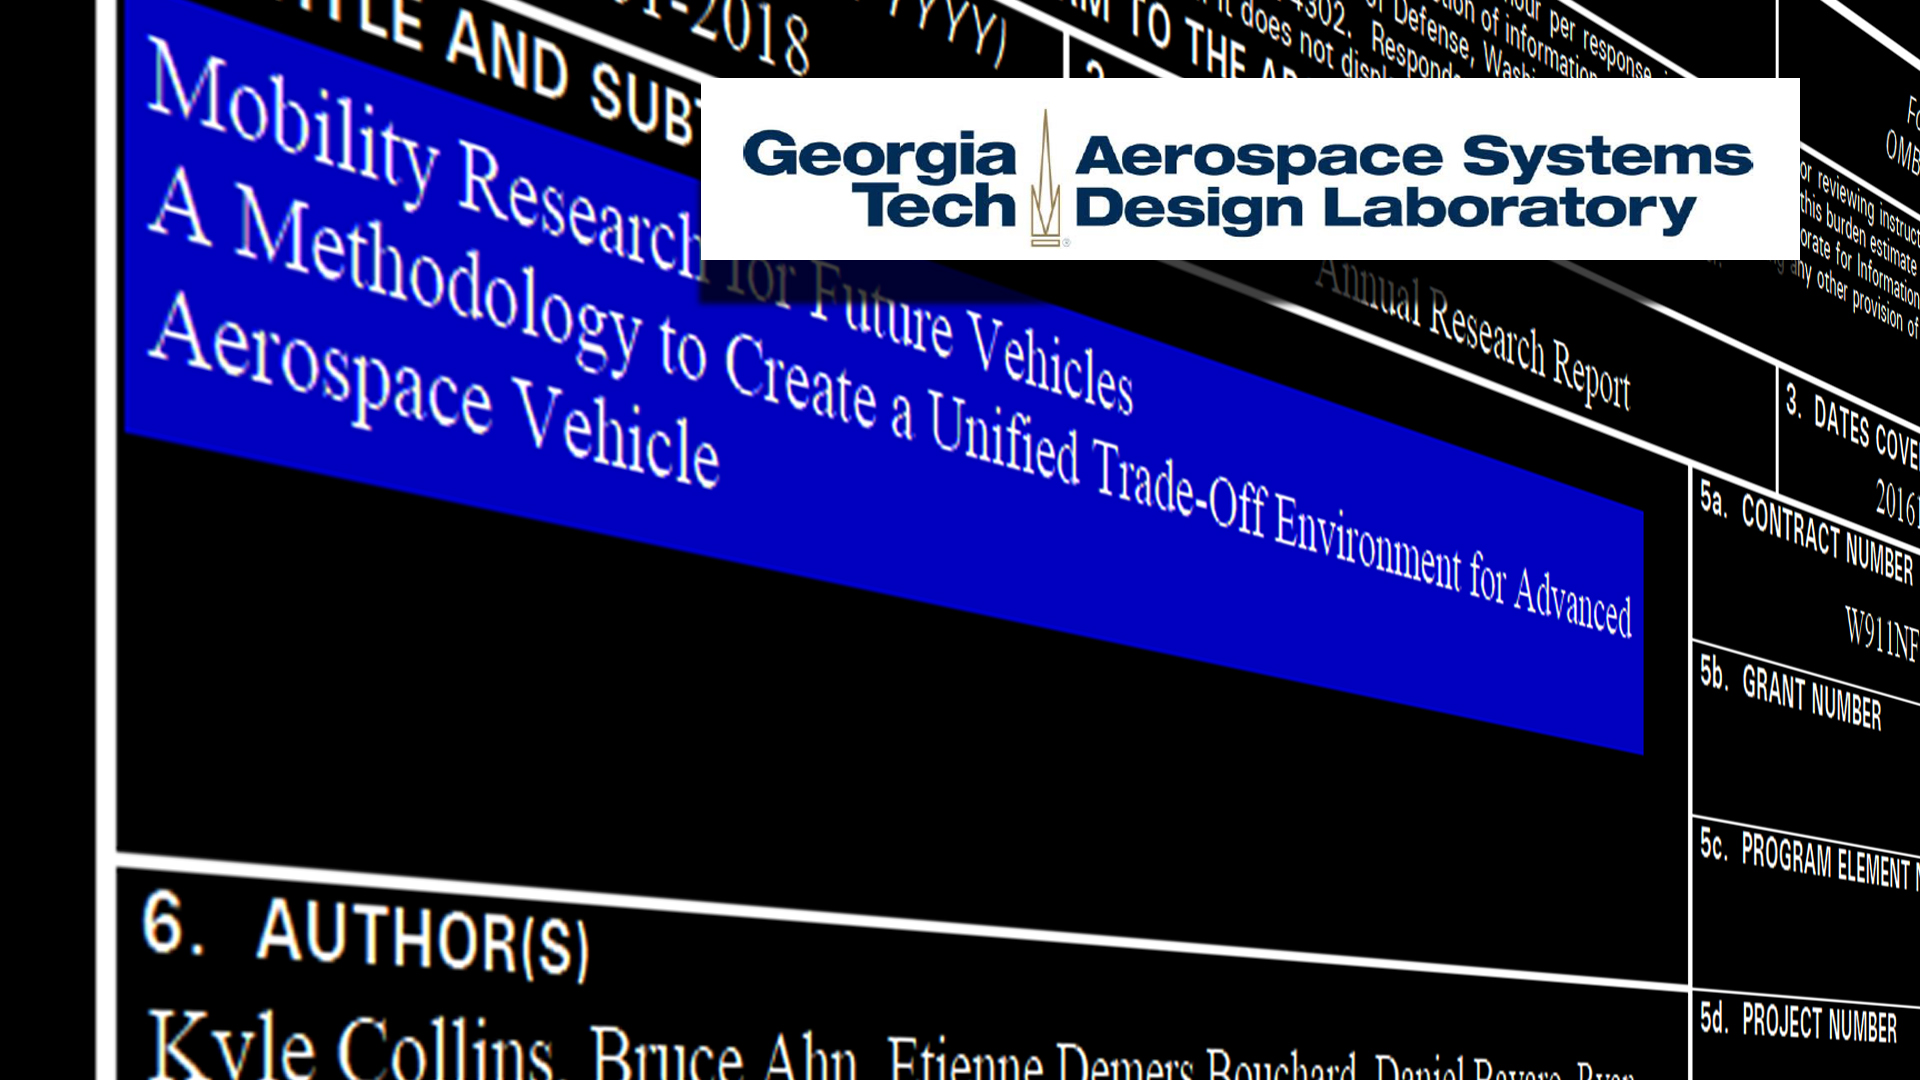 Mobility Research for Future Vehicles: A Methodology to Create a Unified Trade-Off Environment for Advanced Aerospace Vehicle – January 2018